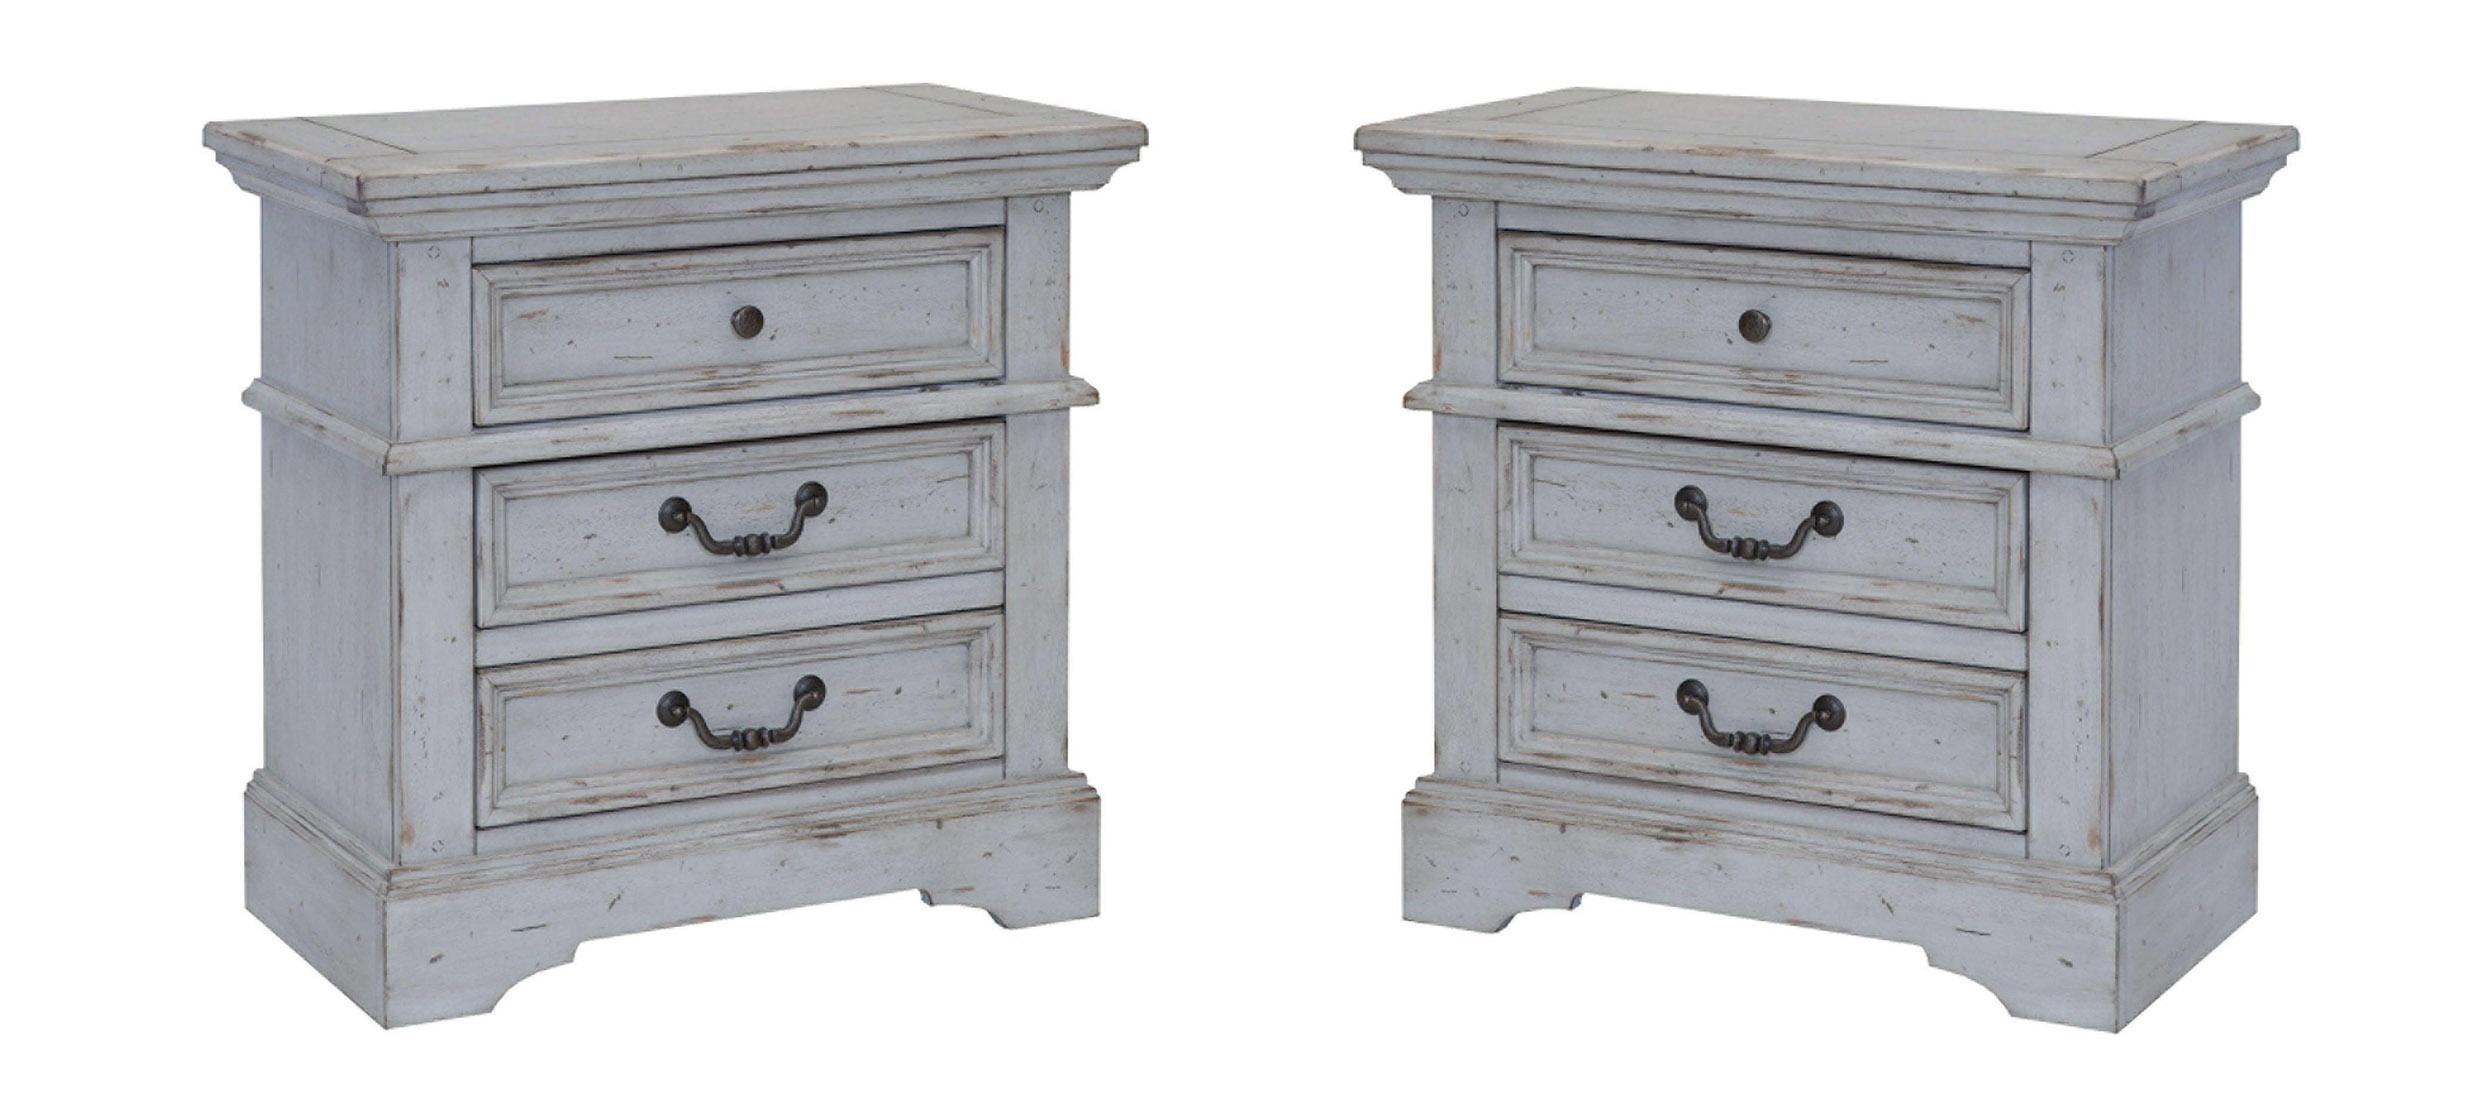 Classic, Traditional Nightstand Set 7820 STONEBROOK 7820-430-Set-2 in Antique, Gray 